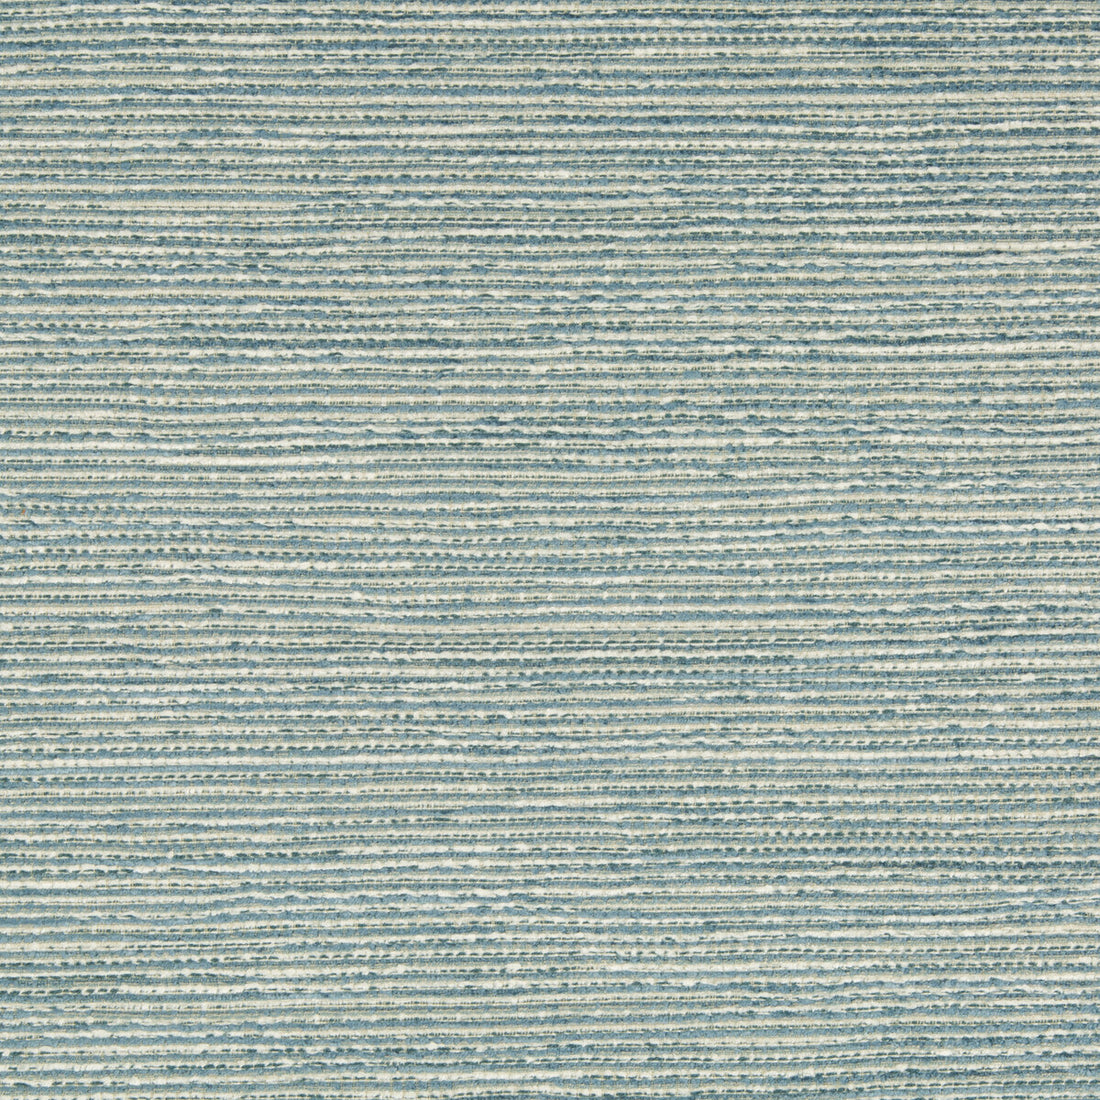 Kravet Design fabric in 34696-5 color - pattern 34696.5.0 - by Kravet Design in the Crypton Home collection